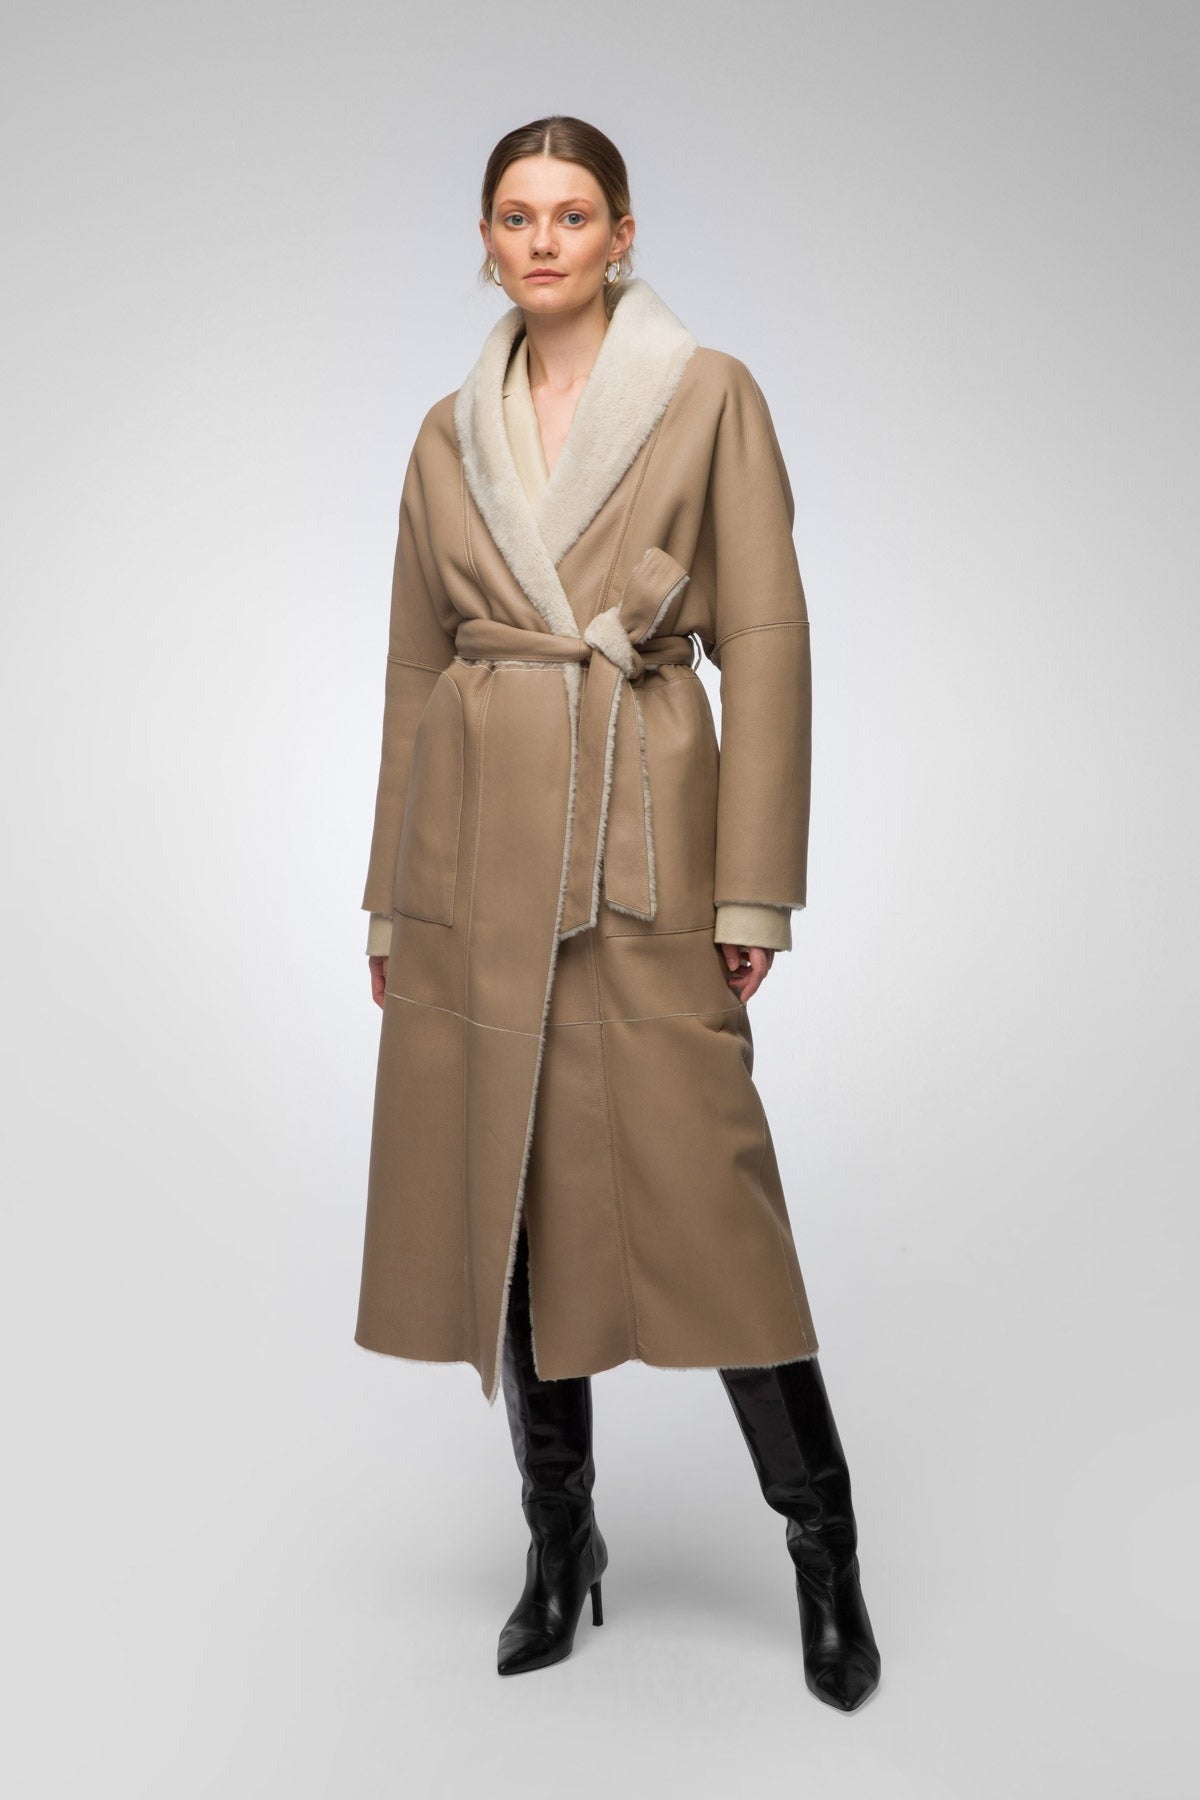 Women's Double Sided Shearling Leather Coat In Tan Brown